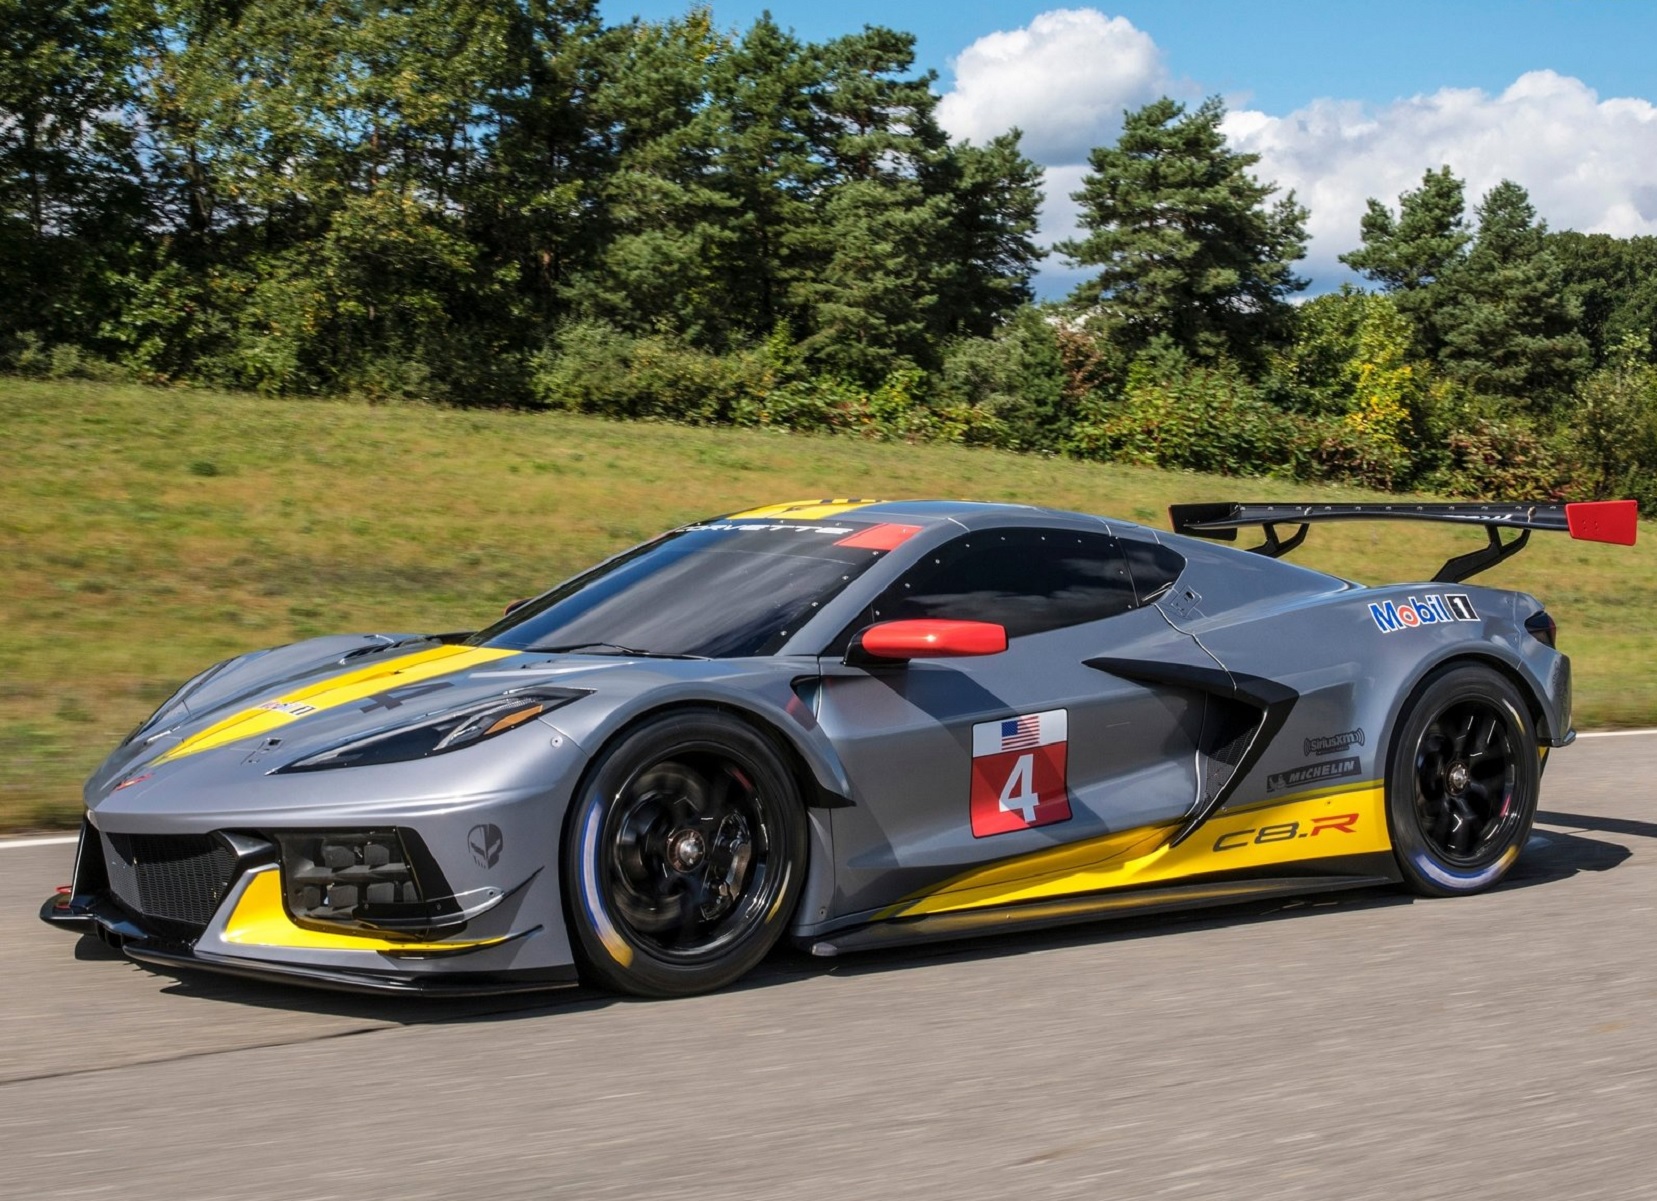 The gray-and-yellow 2020 Chevrolet Corvette C8.R drives down a forest-lined road